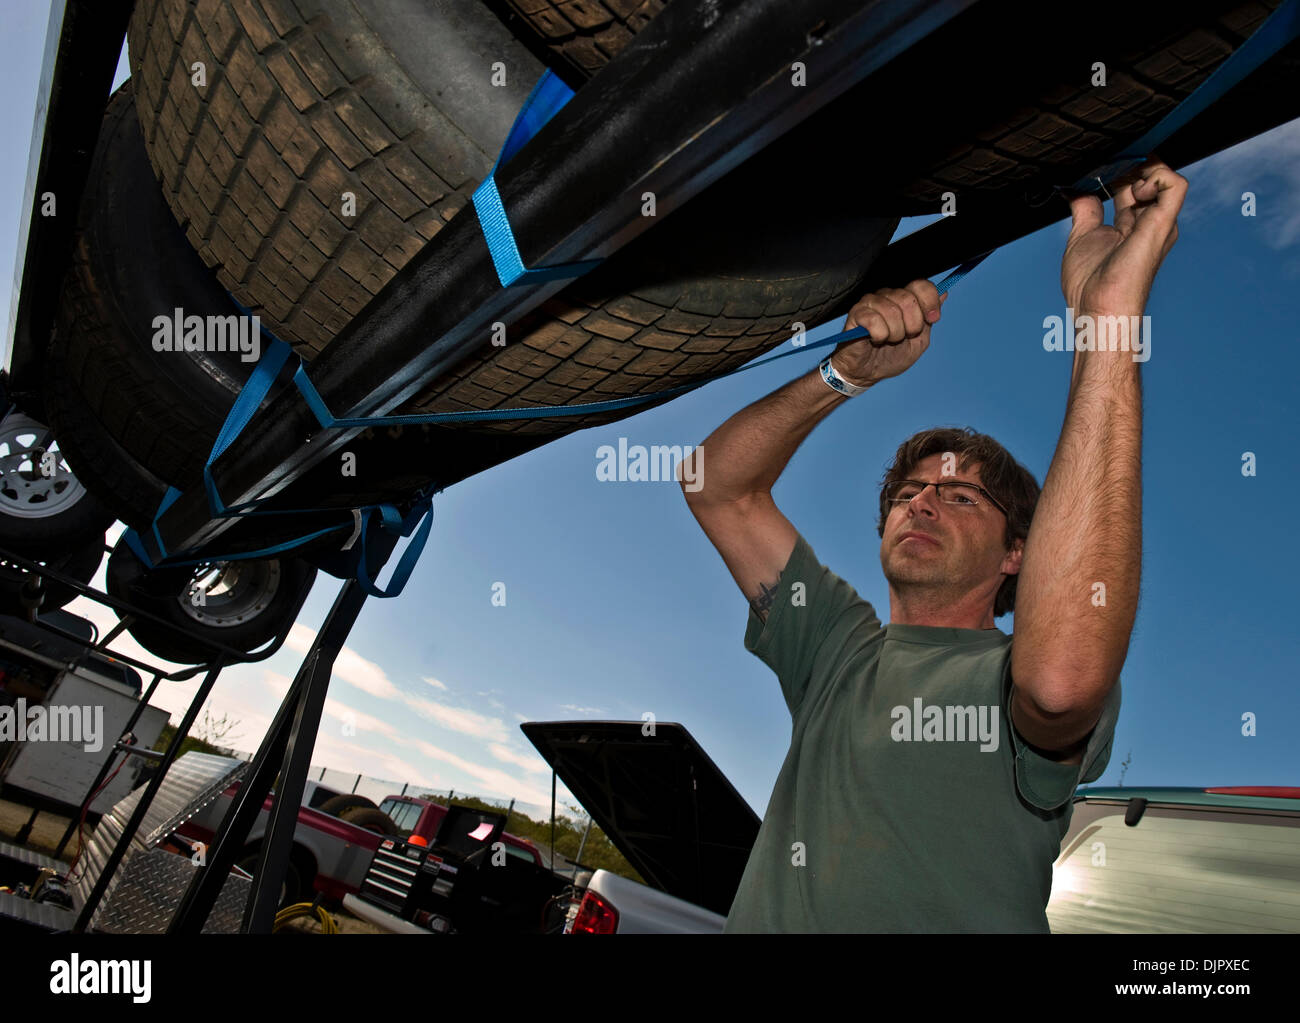 Apr 24, 2010 - New Egypt, New Jersey, USA -  DONNY ANDREAS, from Langhorne, PA, makes certain the tire he just swapped out is secured on his trailer in the pits of the 3/8 mile, red clay New Egypt Speedway, the site of short track car racing since the 1950's.  In this small New Jersey town which borders the Jersey pine barrens, the racing season runs from April through October.  On Stock Photo